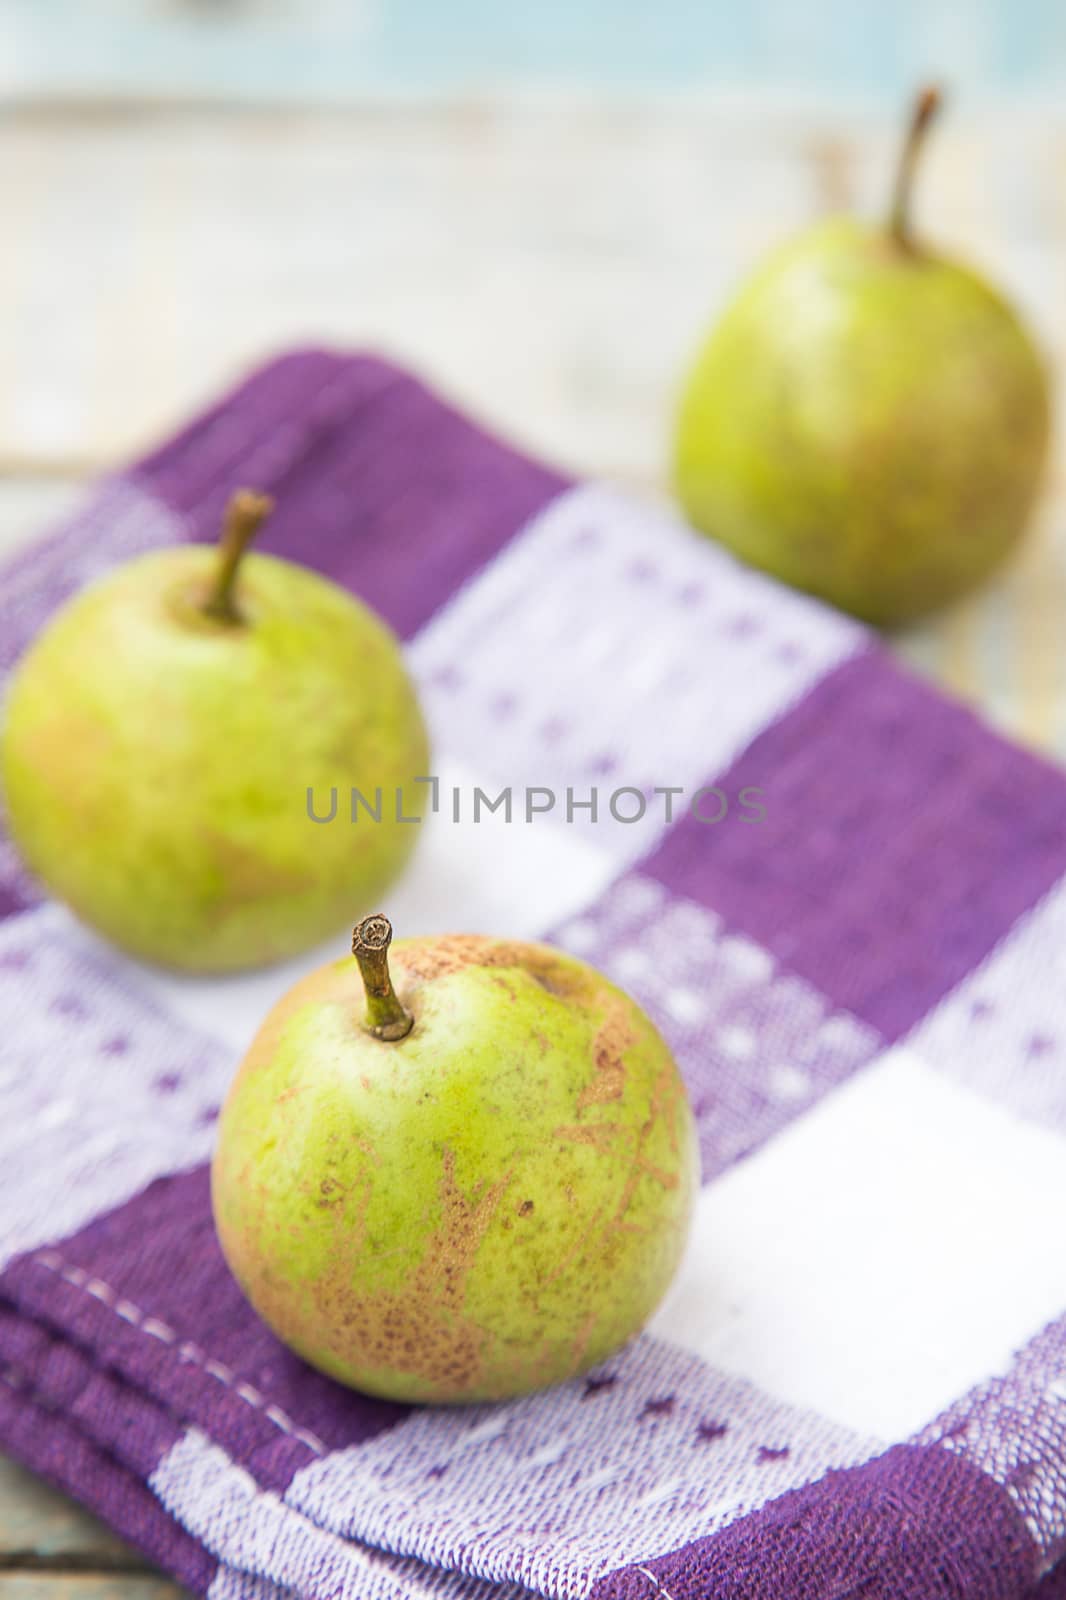 few fresh ripe pears are on a wooden surface
